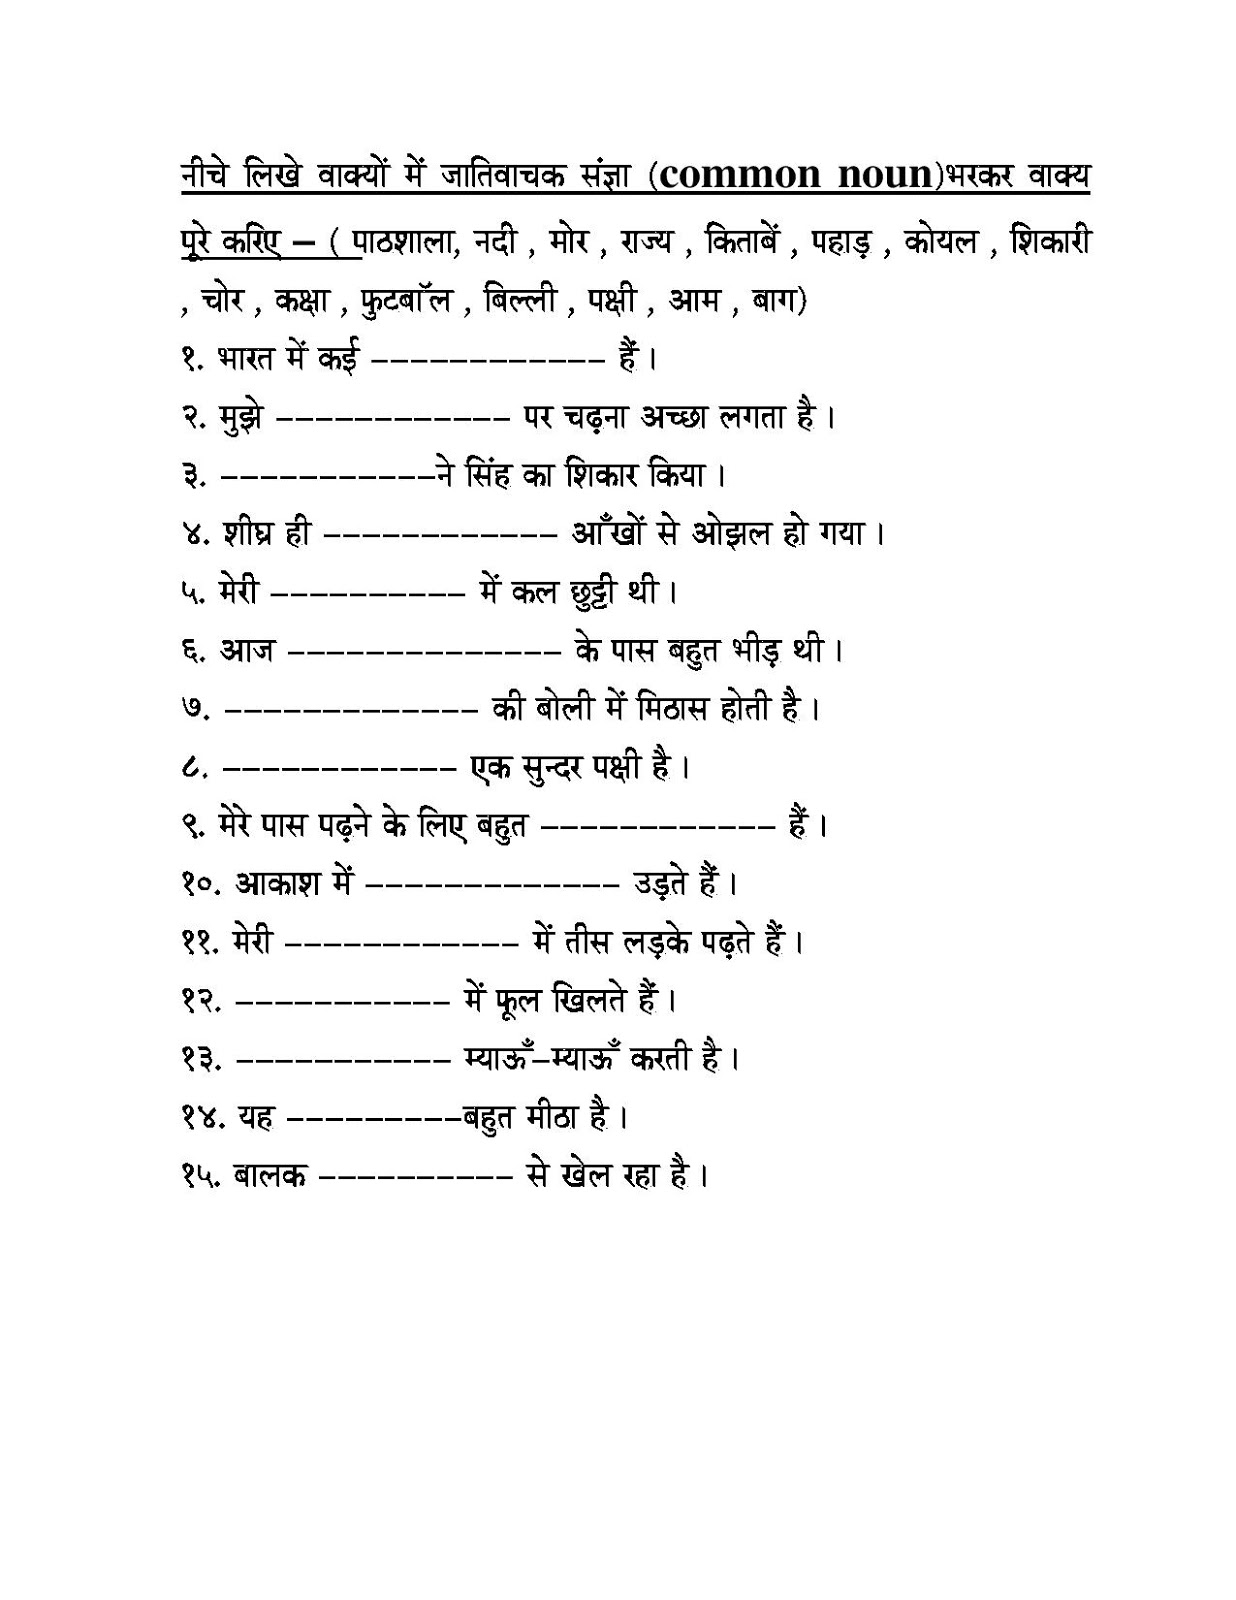 5th Grade Hindi Grammar Worksheets For Class 5 With Answers TUTORE ORG Master Of Documents